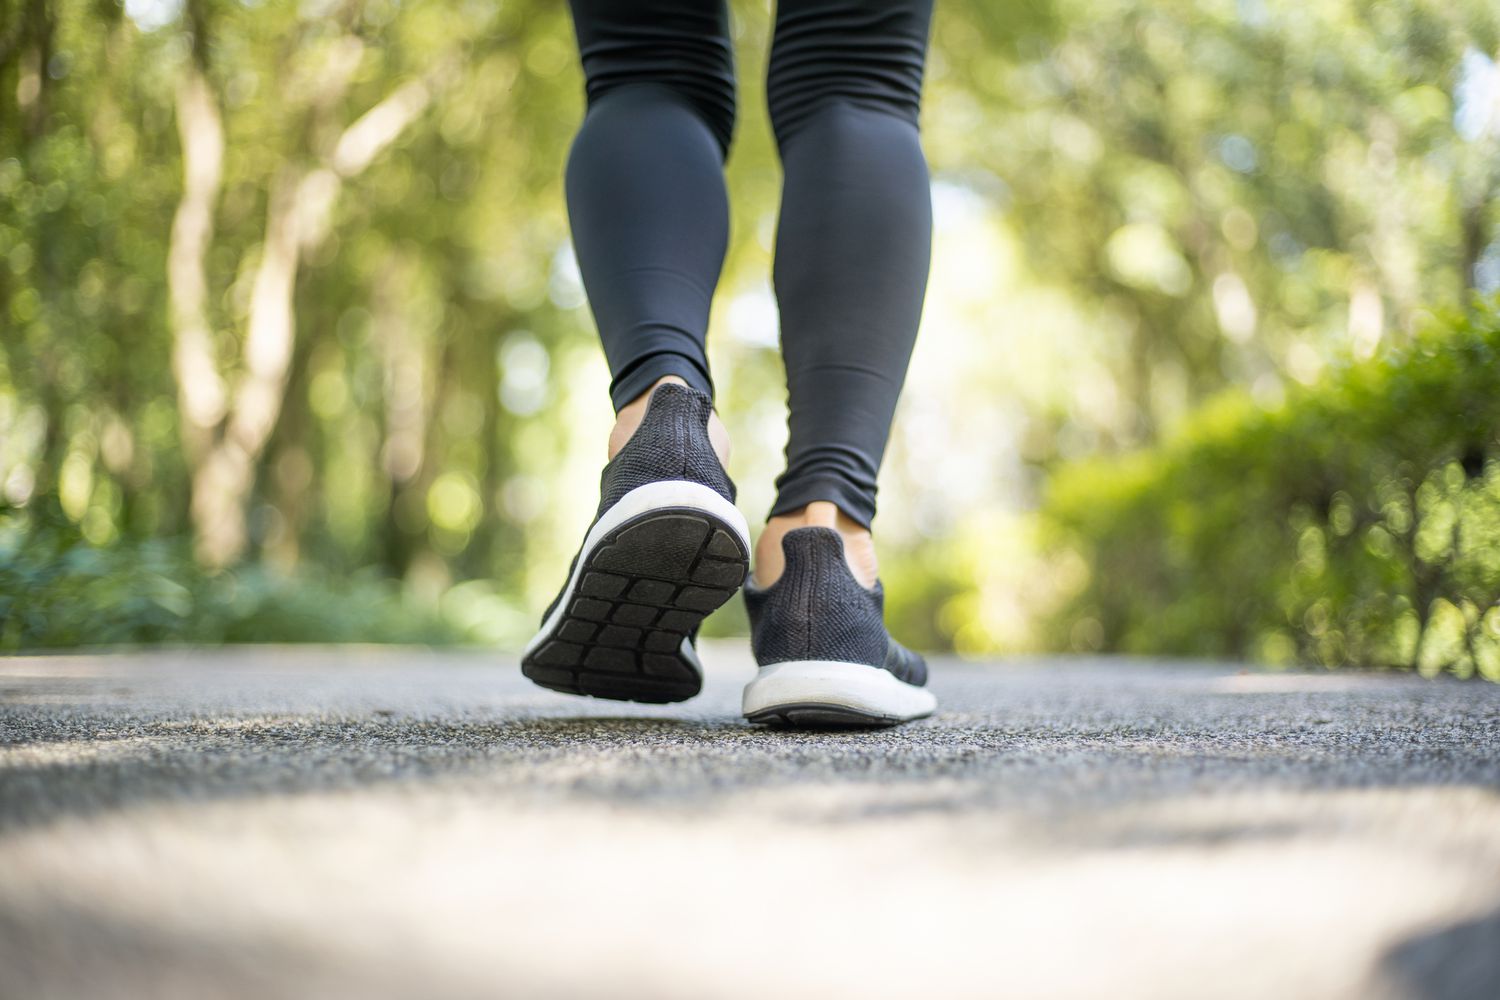 Walking boosts the immune system.